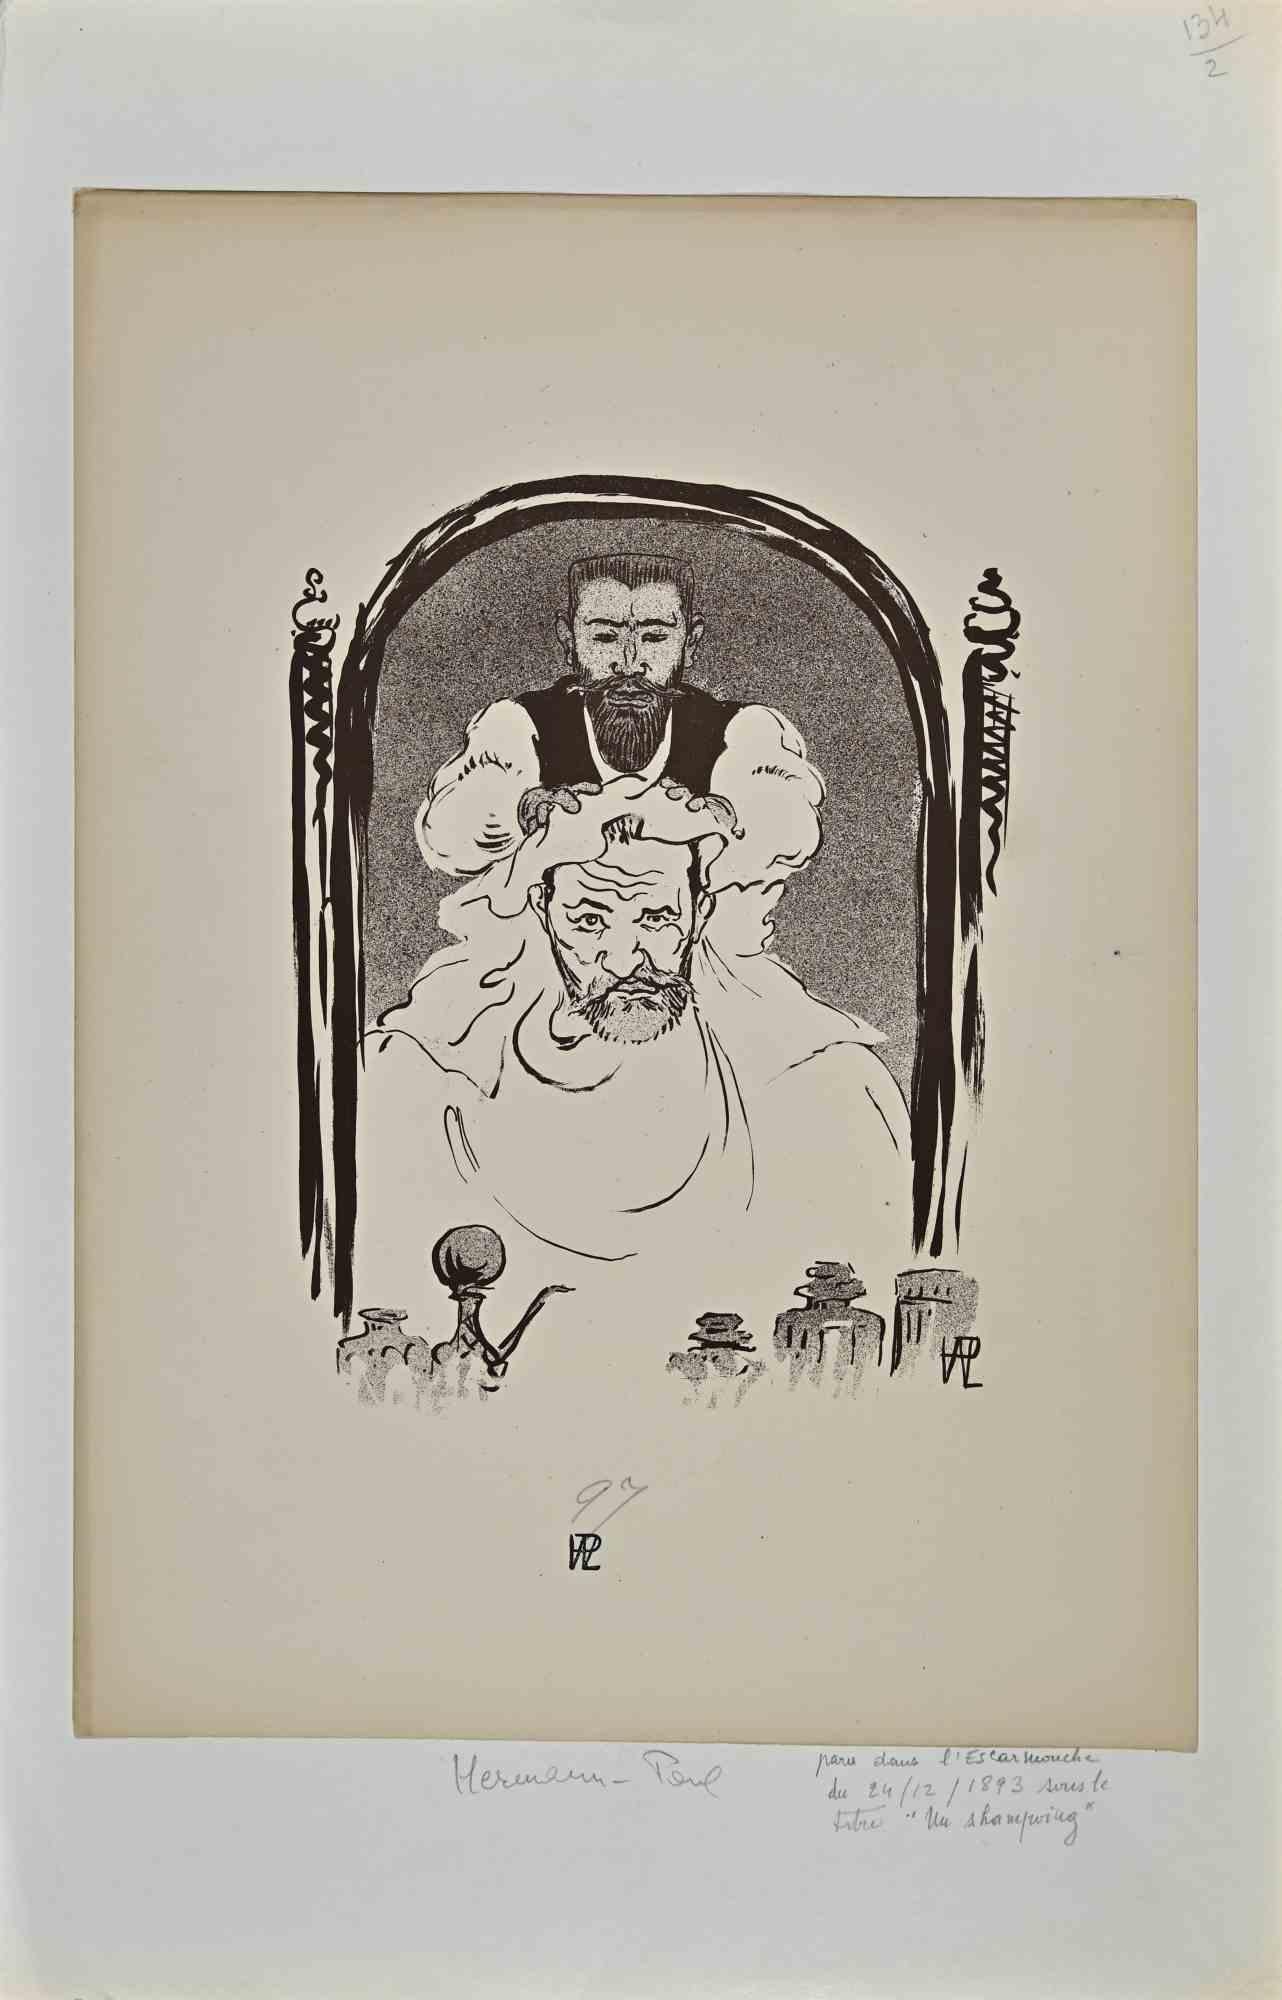 Un-Shampooing (Self-Portrait)is a china ink drawing realized by Hermann Paul. 

This drawing was featured on the cover of l'Escarmouche in December 1893. Passpartout included cm 50.5x32.5

Hand signed on the lower right corner.

Good